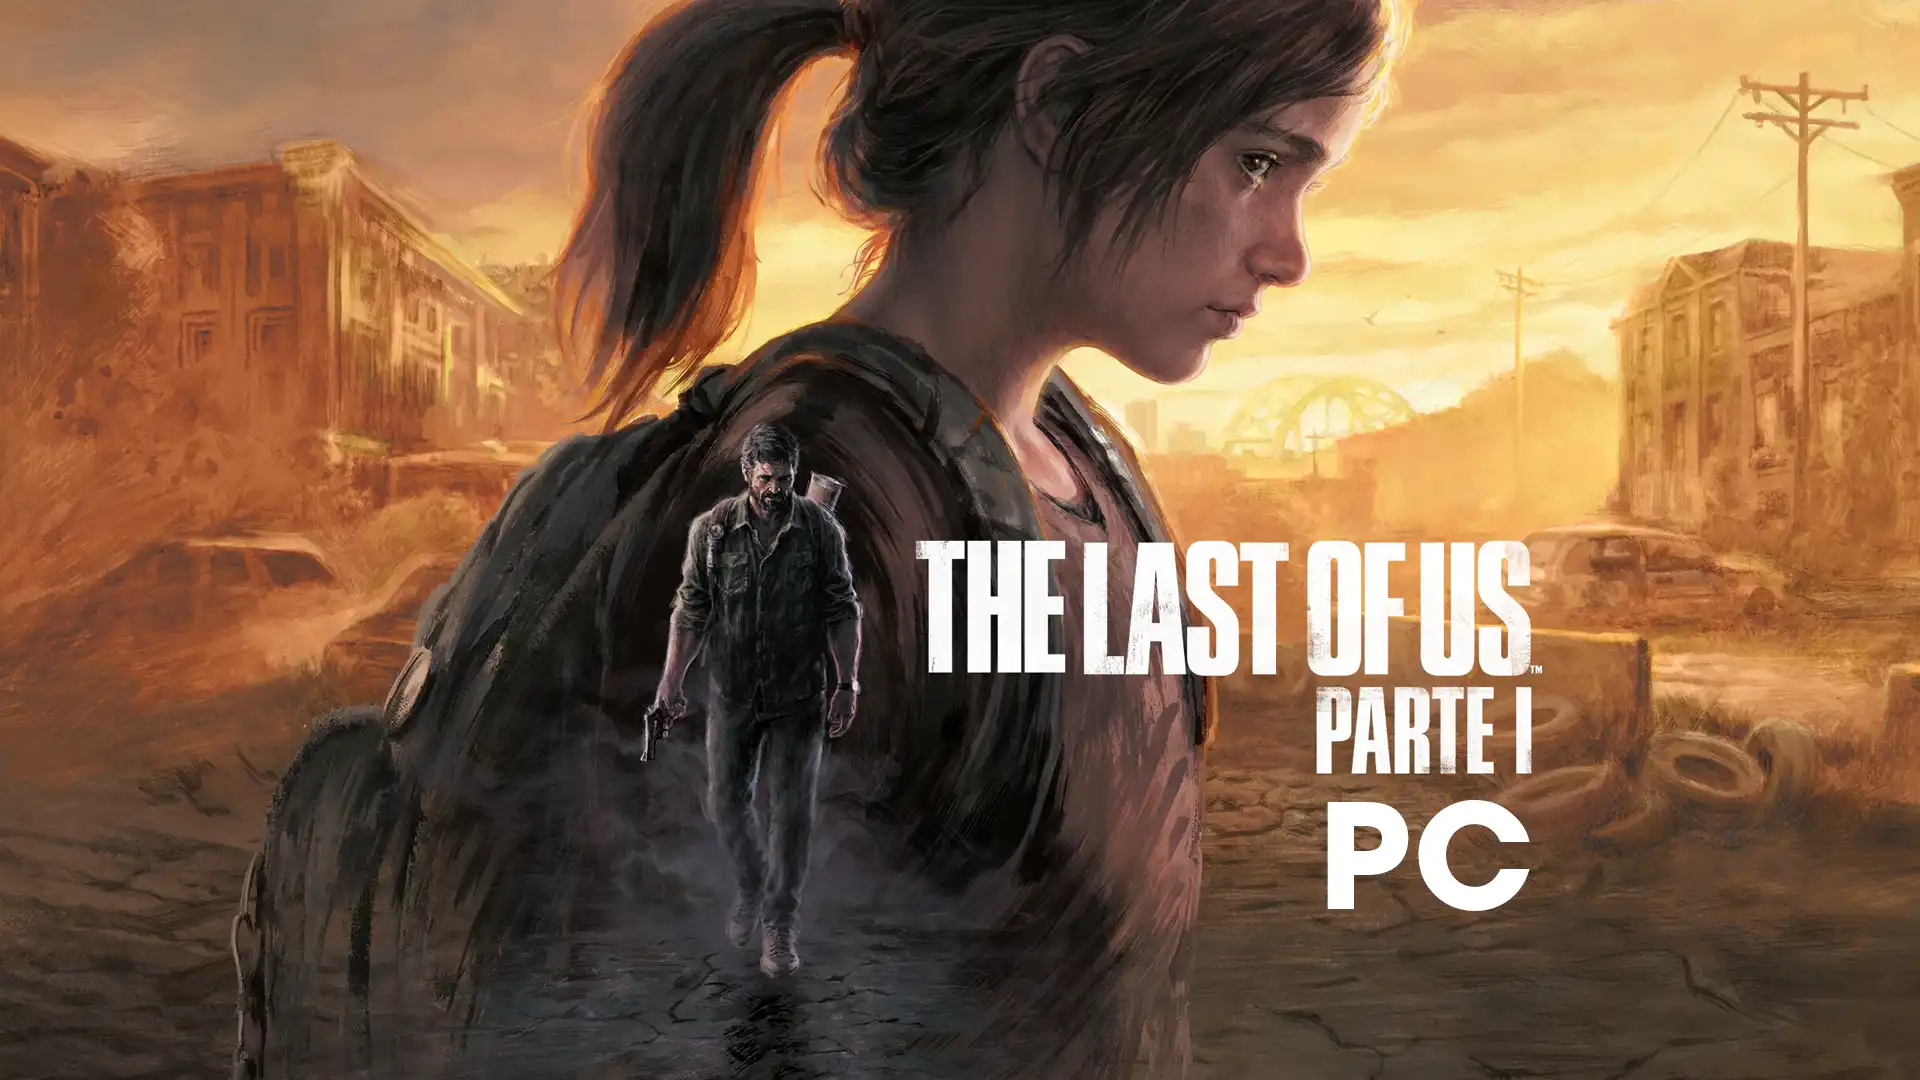 The Last Of Us PC